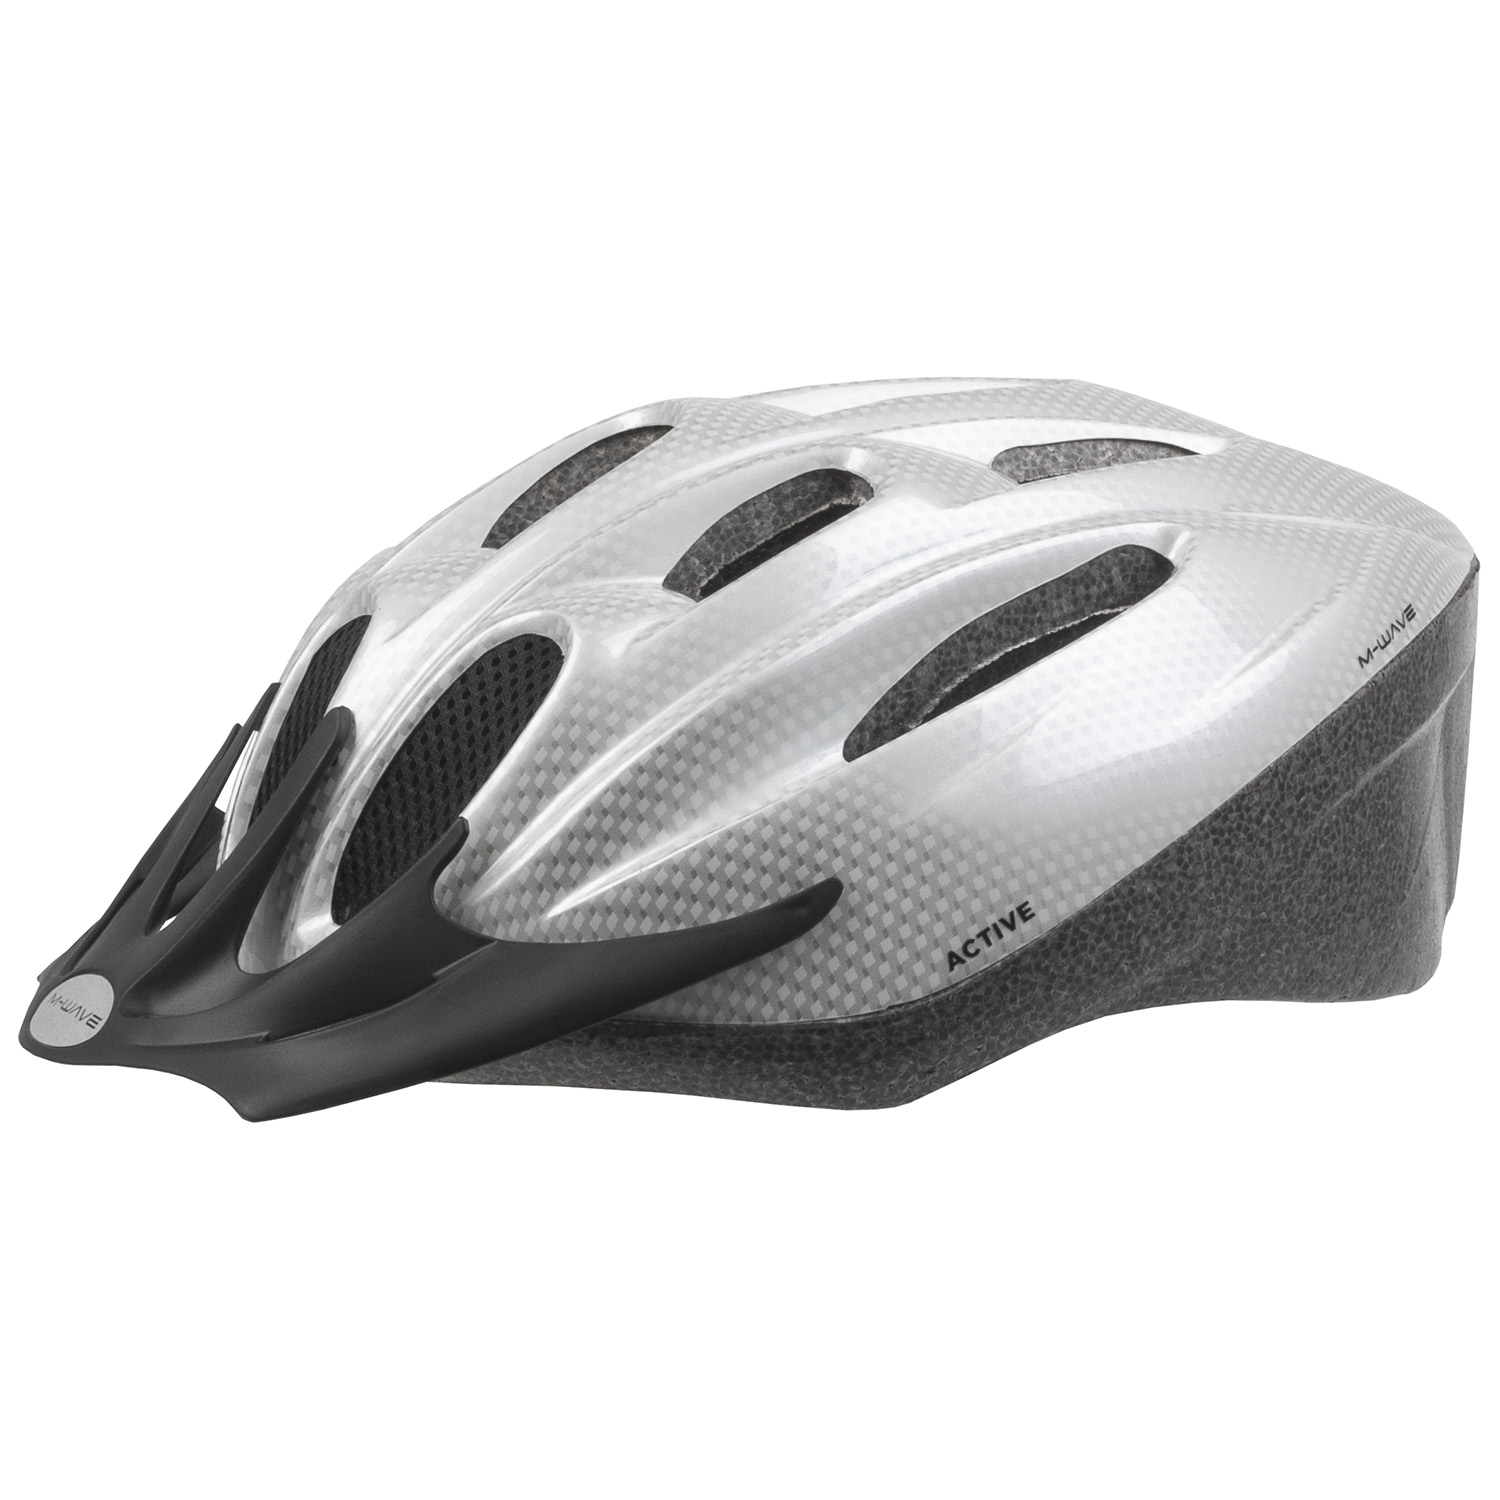 733128 M-WAVE Active bicycle helmet – AVAILABLE IN SELECTED BIKE SHOP